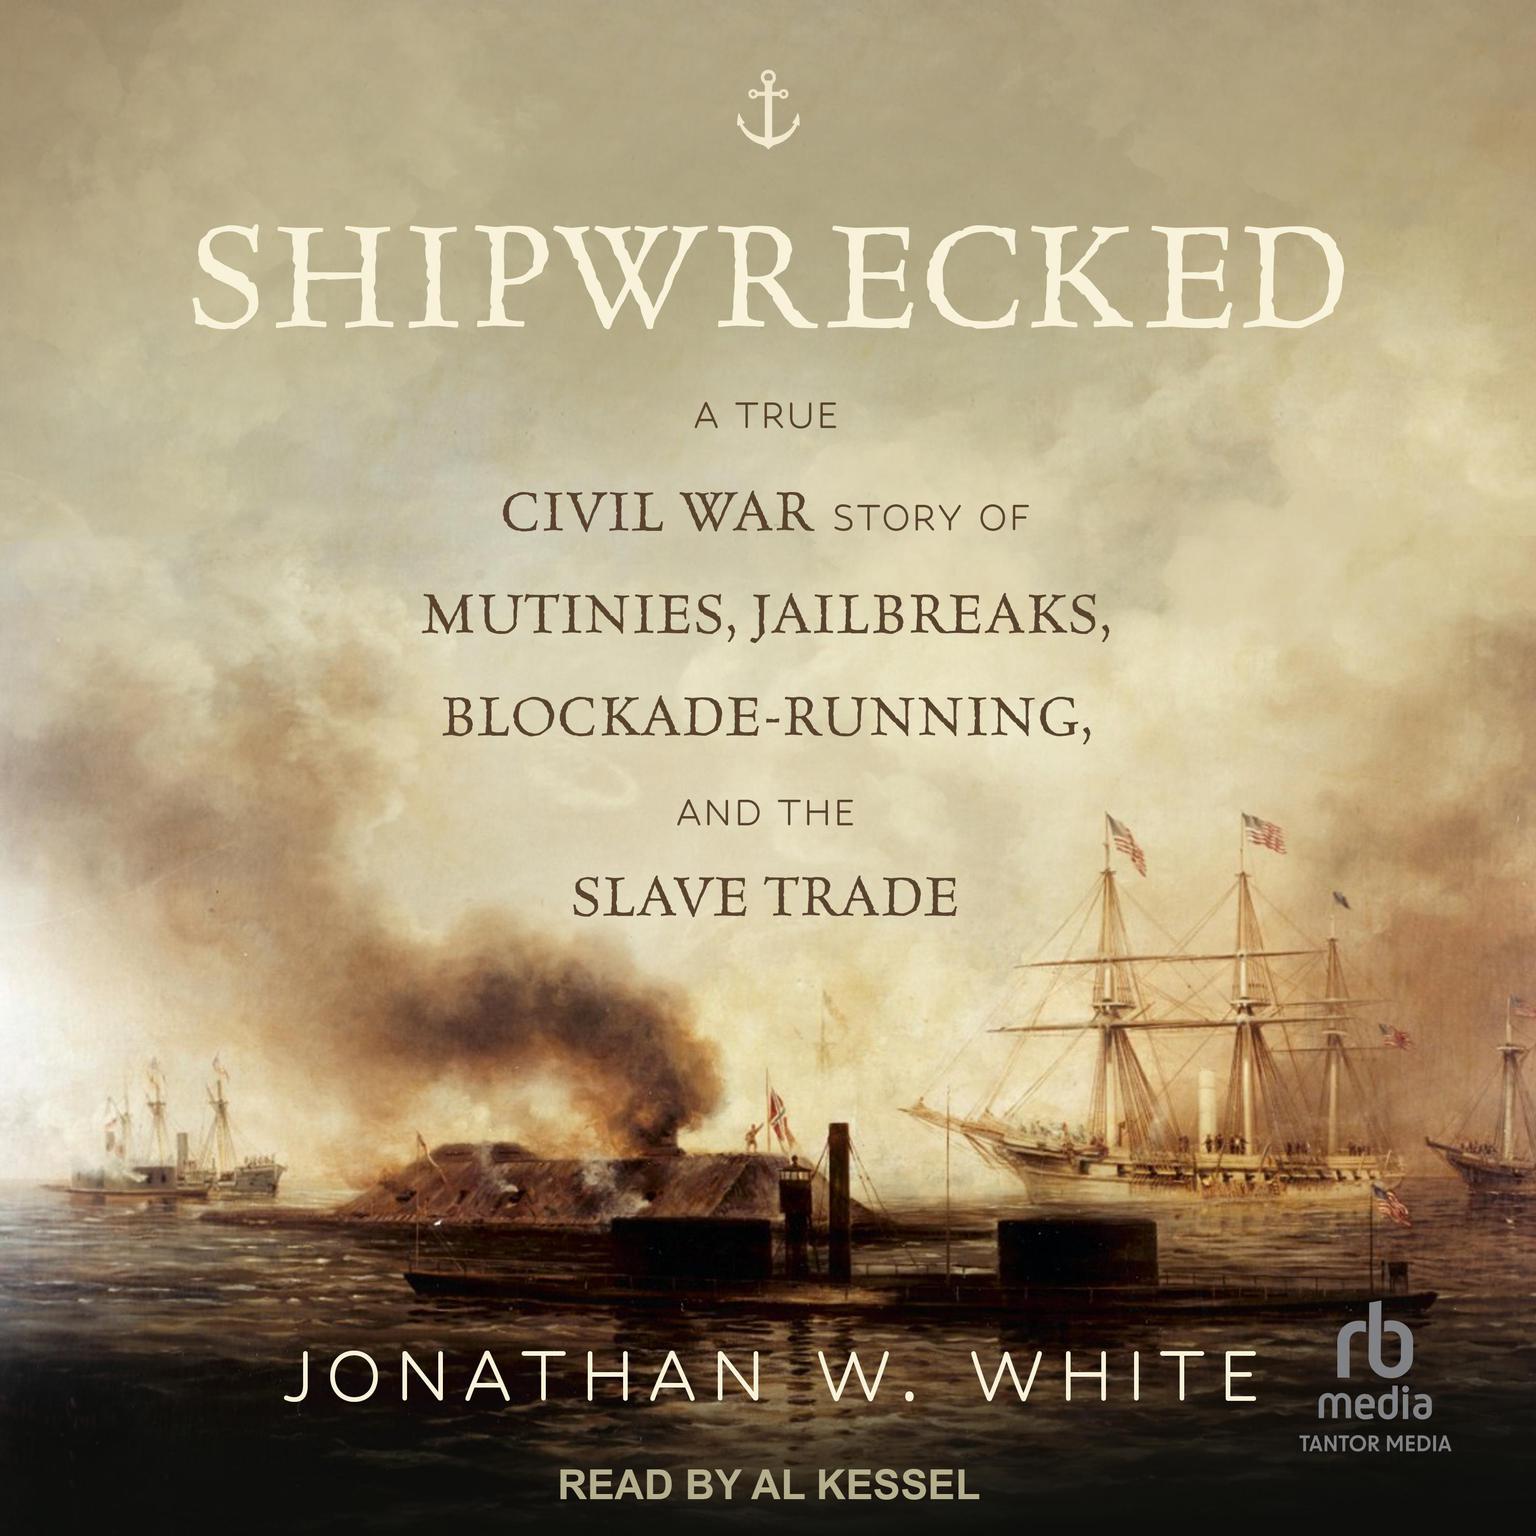 Shipwrecked: A True Civil War Story of Mutinies, Jailbreaks, Blockade-Running, and the Slave Trade Audiobook, by Jonathan W. White